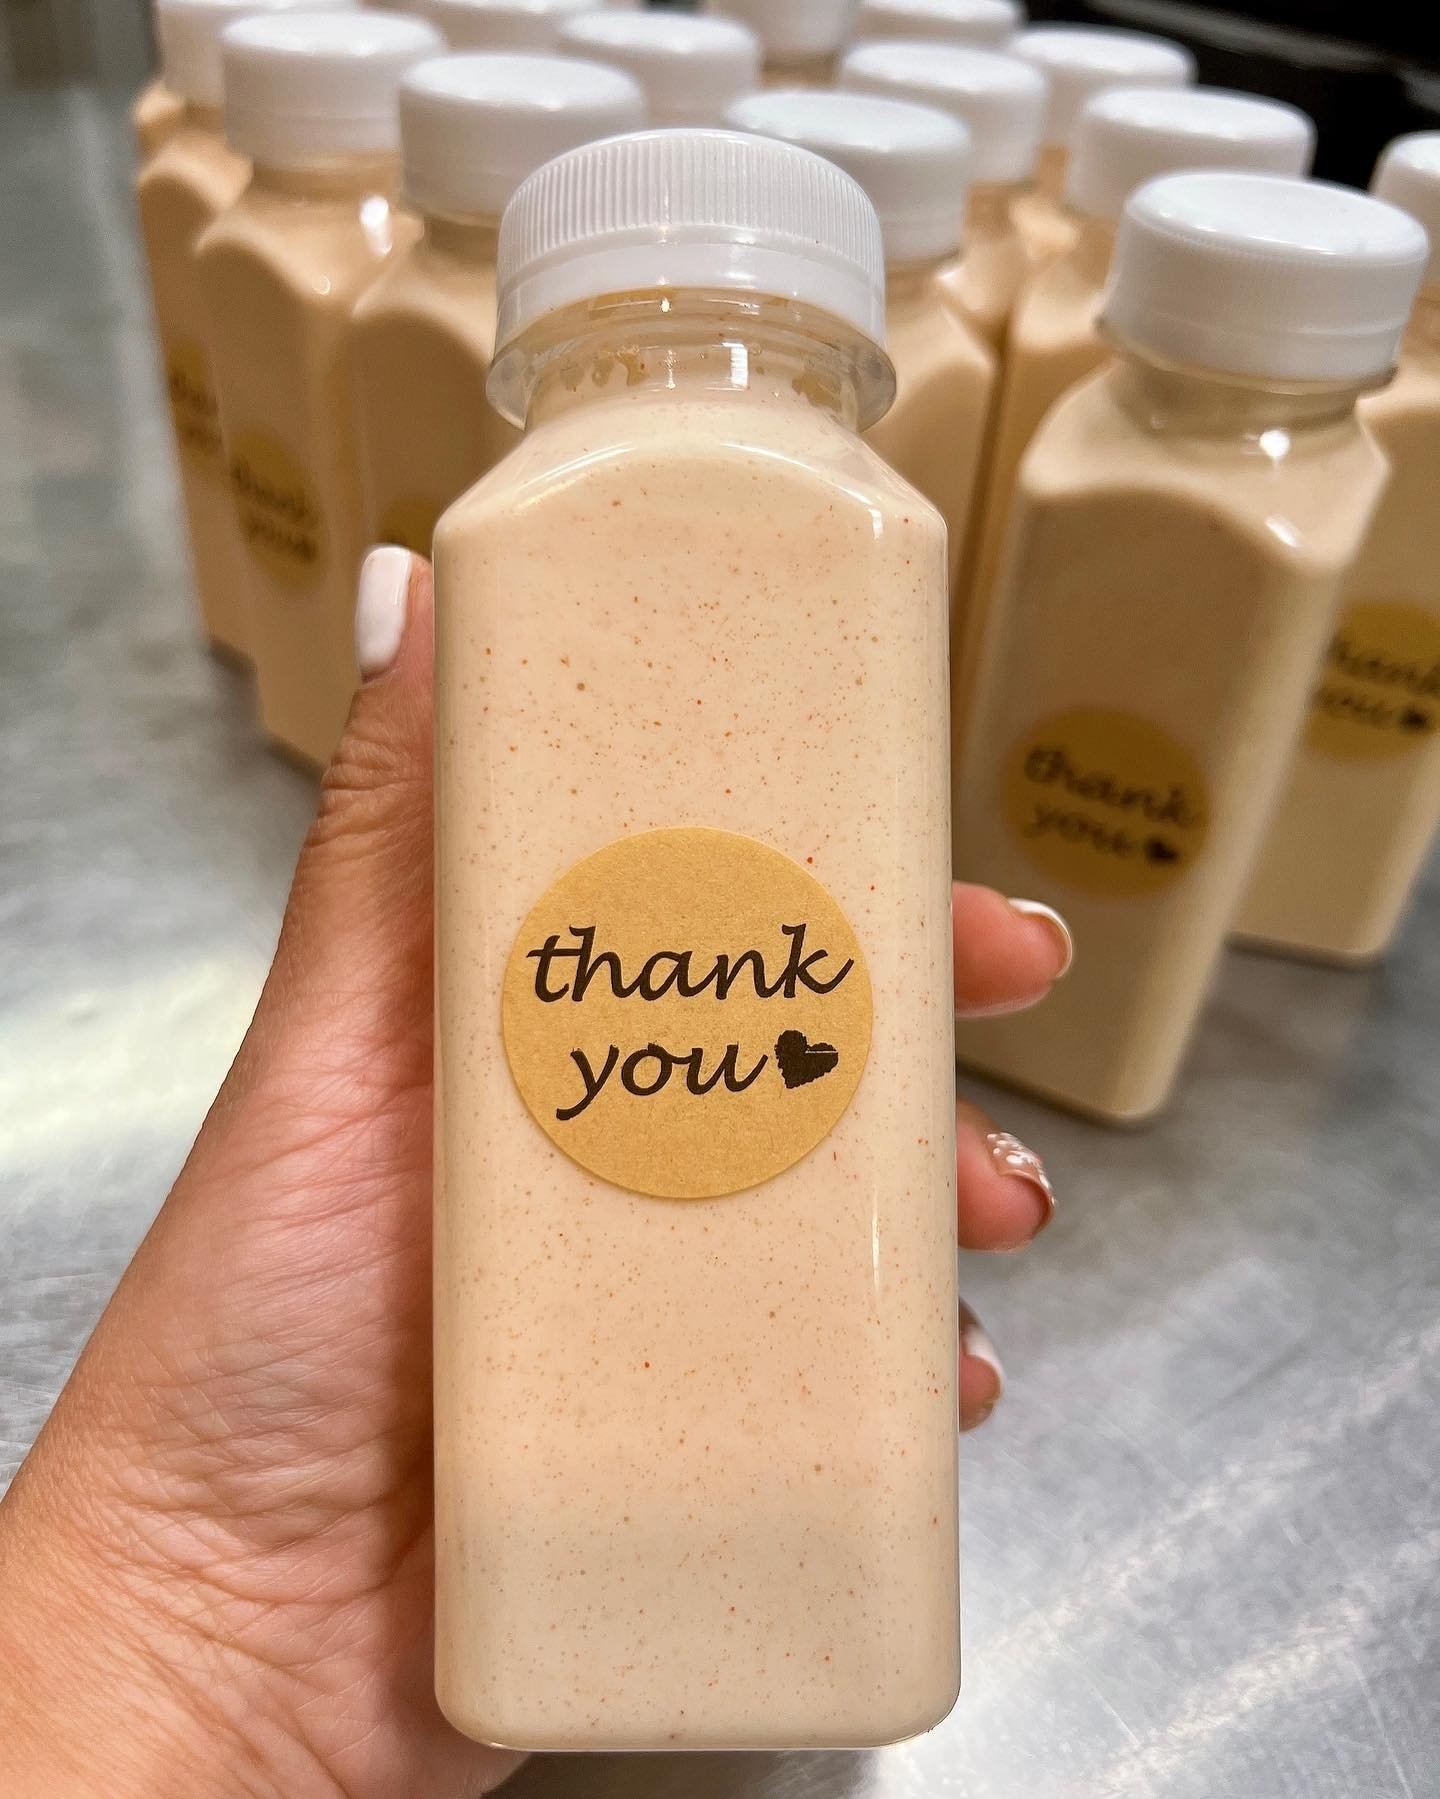 Yum yum sauce lovers alert !!!
Who have been in love with our home made yum yum sauce at Annie Tea House, now we have 8oz bottle available for u to purchase at ONLY $4 to bring home and enjoy it with any food you desire. Hurry in while supply last 🎉